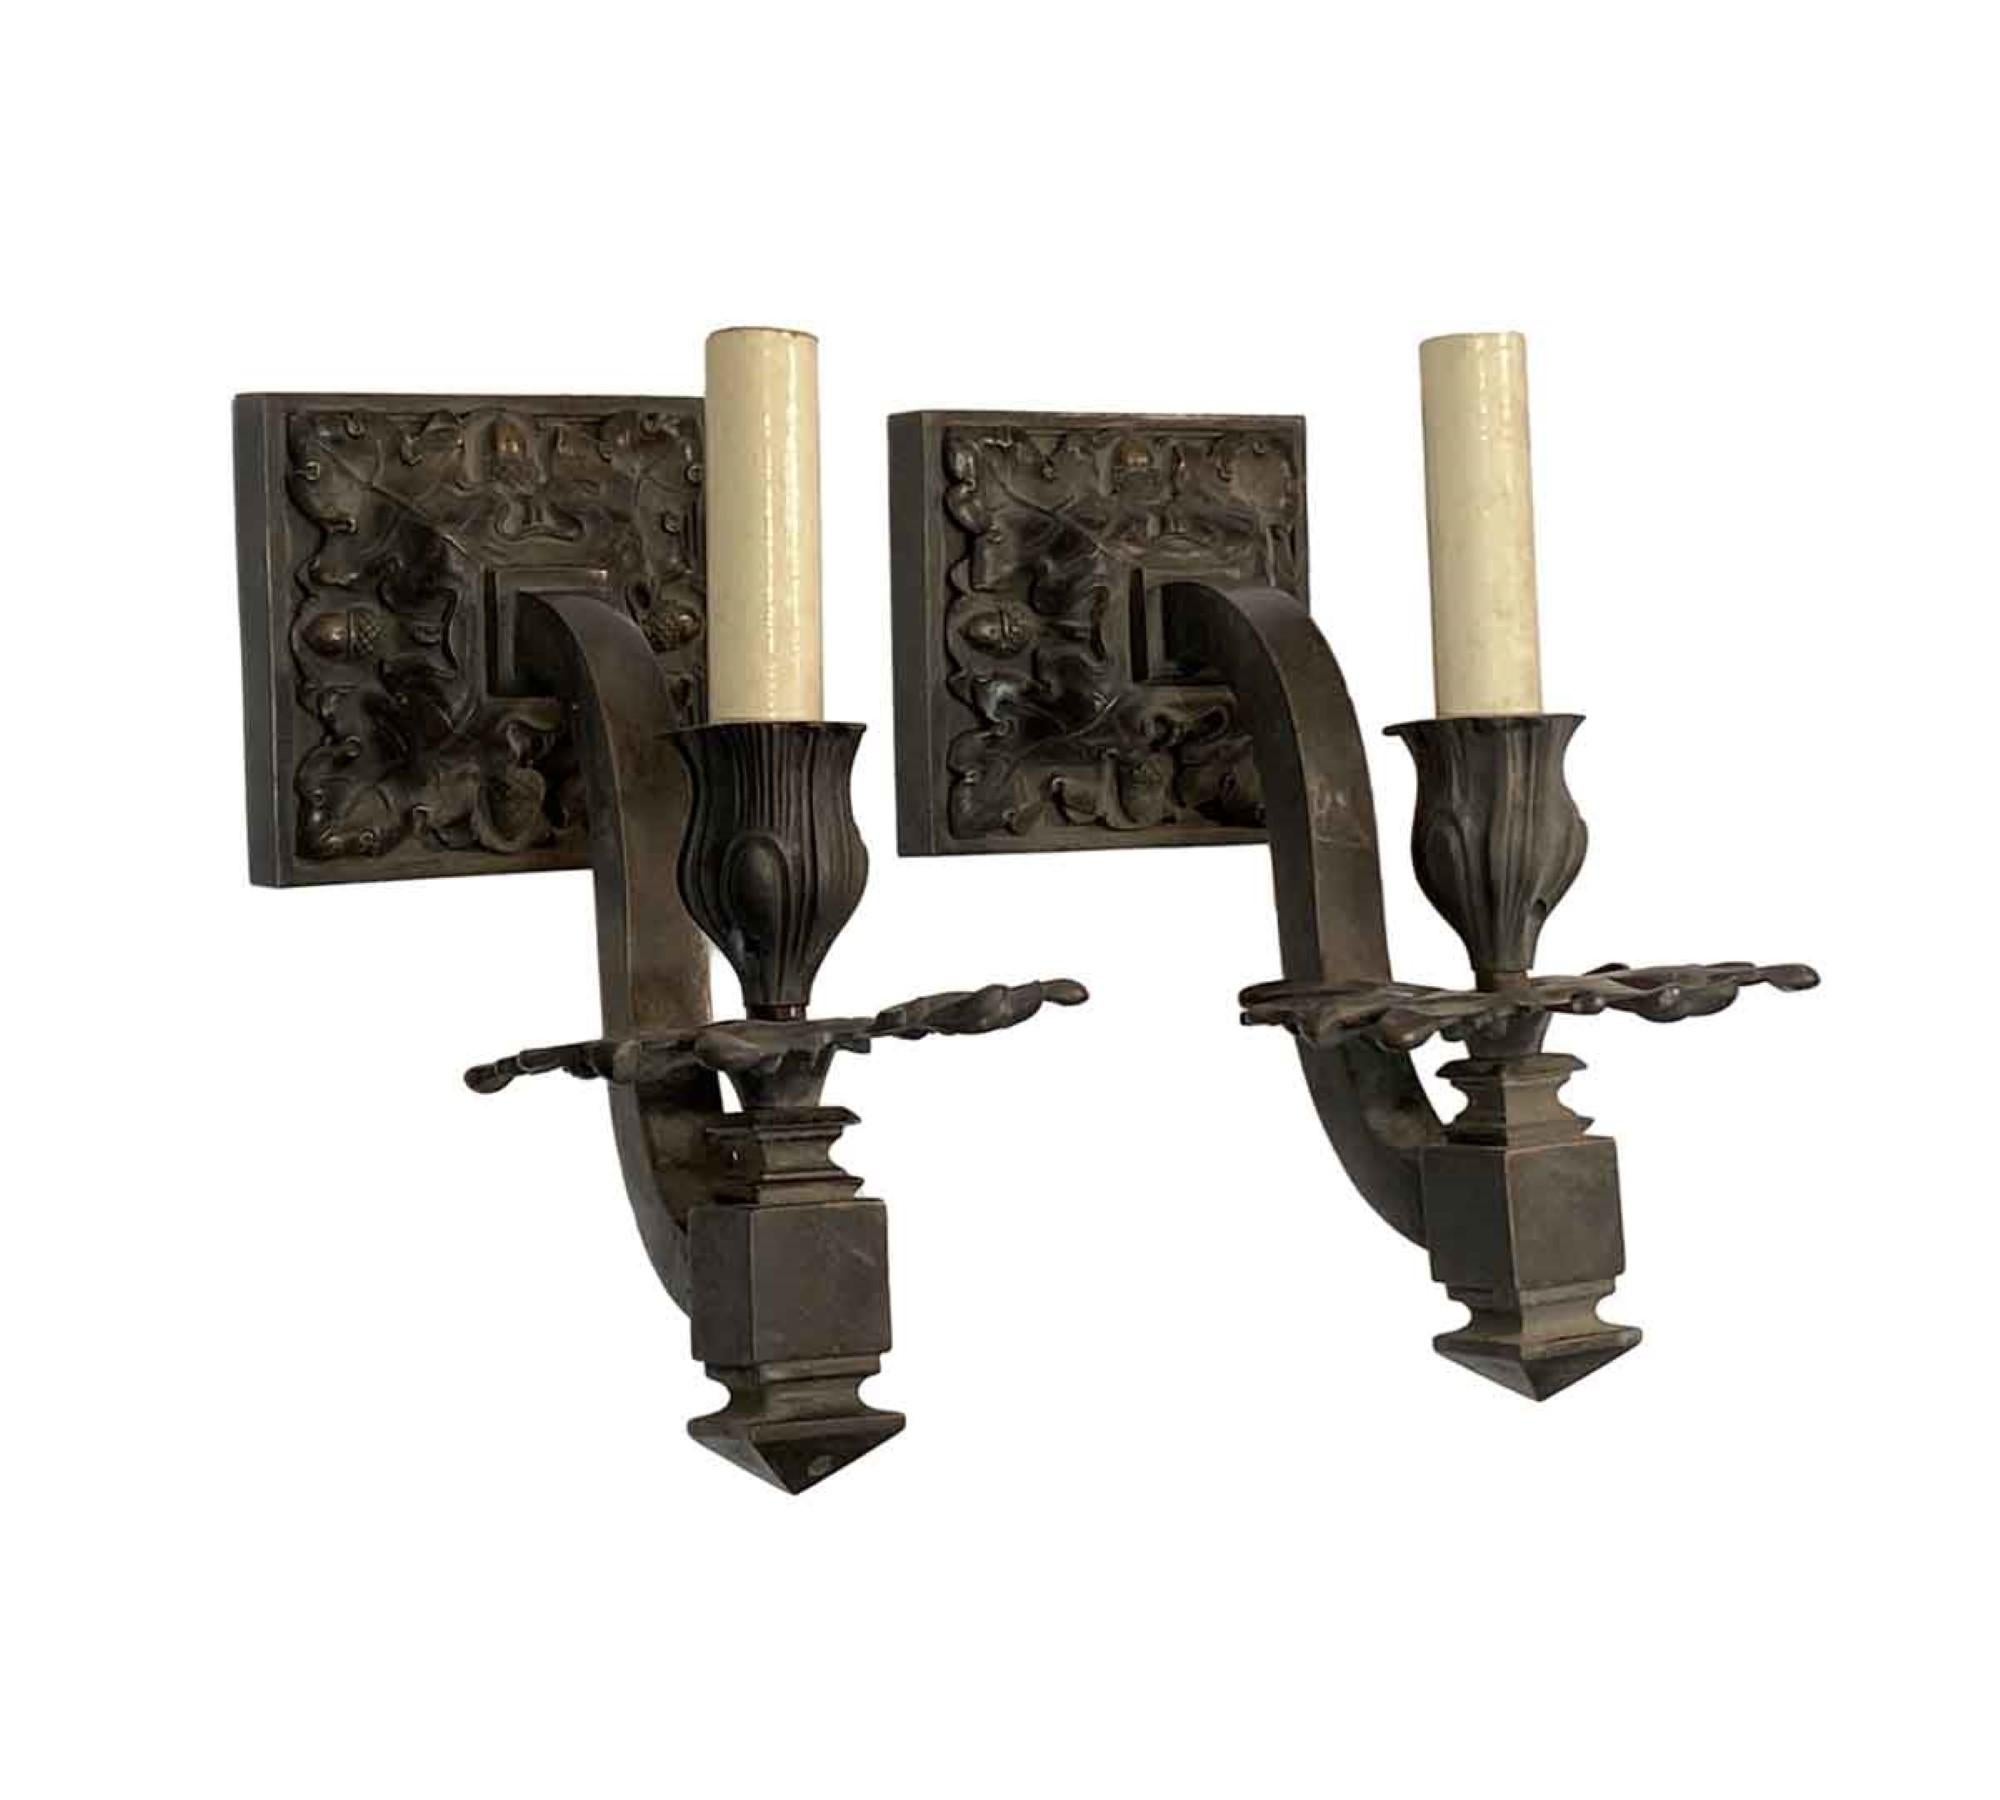 1910s pair of cast bronze one arm acorn and oak leaf detail wall sconces from France. Price includes restoration.